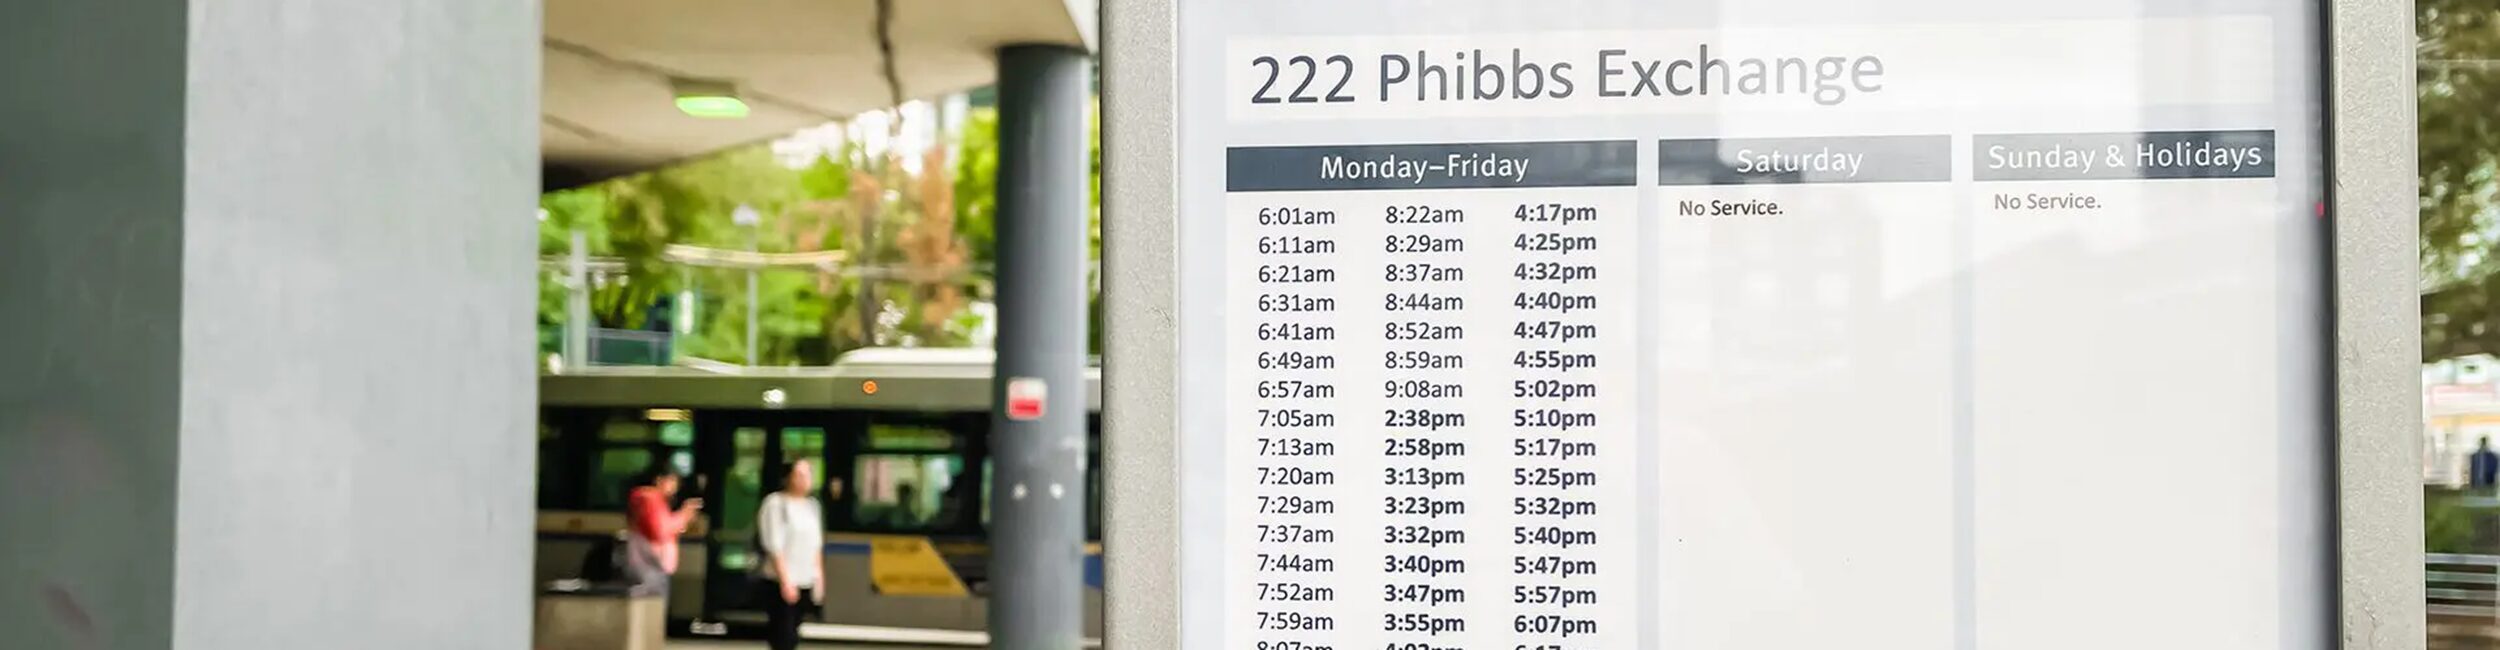 bus timetable for 222 Phibbs Exchange